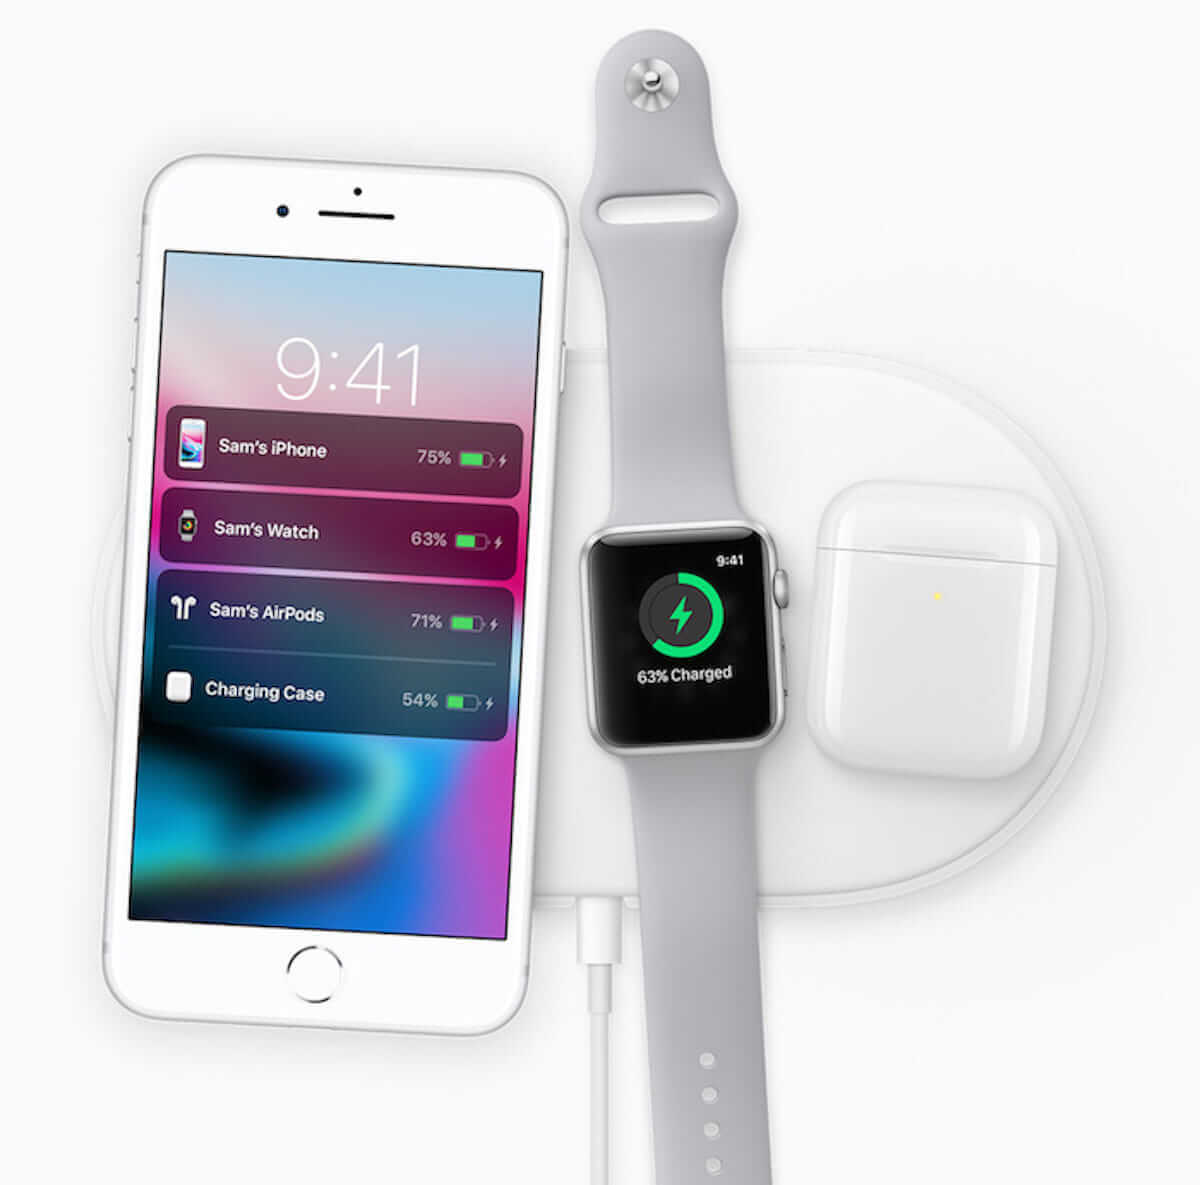 iPhone6.1インチは遅れて発売？AirPower、AirPodsワイヤレス充電ケースは9月に同時登場するかも！ technology180815_airpower_3-1200x1185